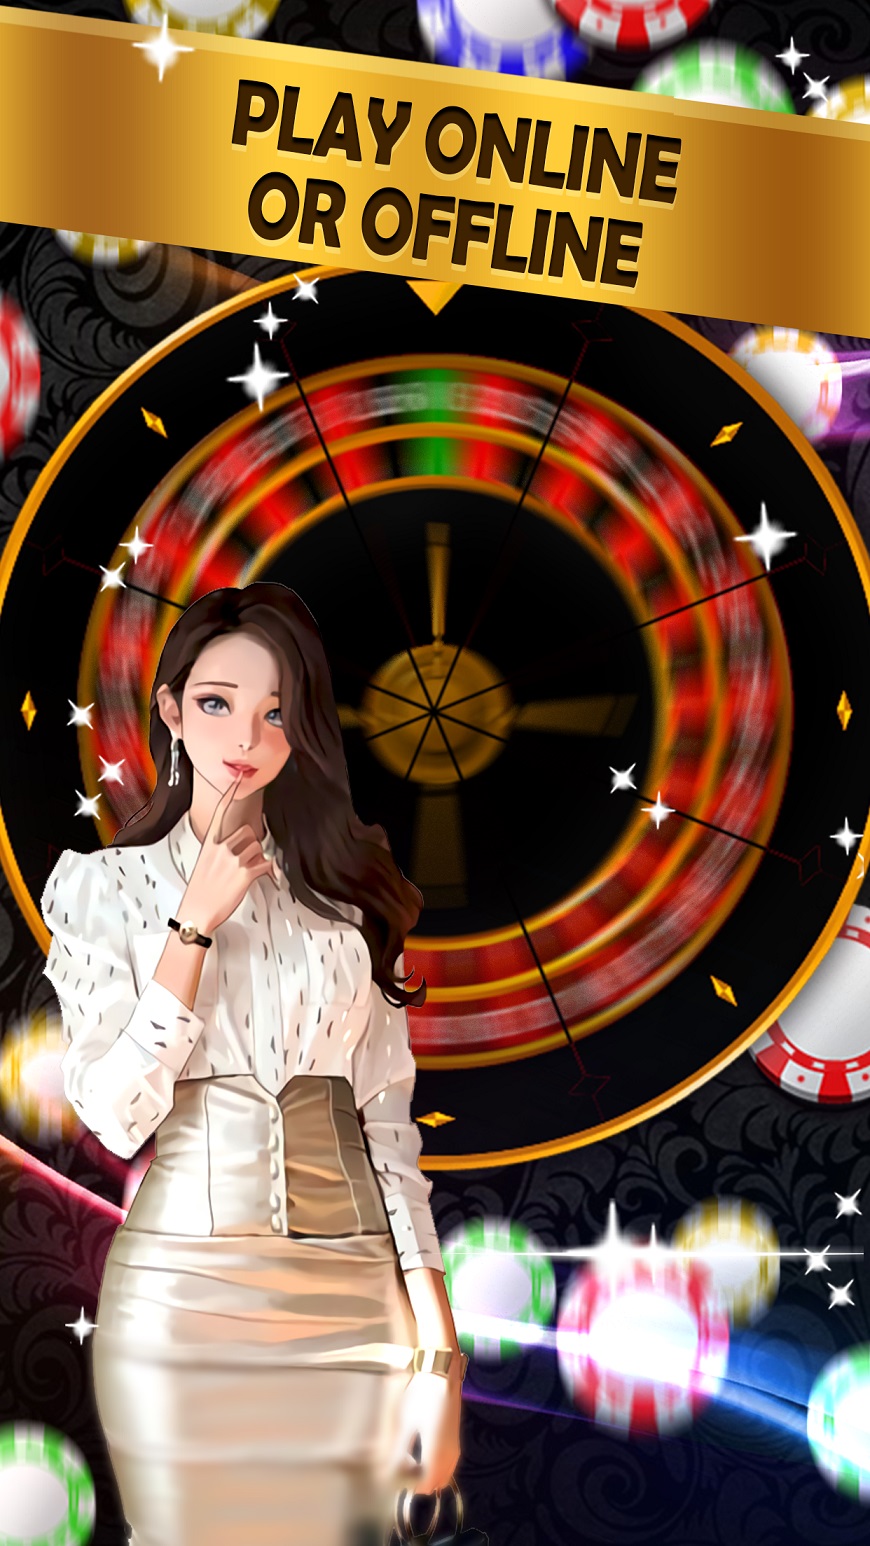 Roulette Royale Deluxe - FREE Vegas Casino Game